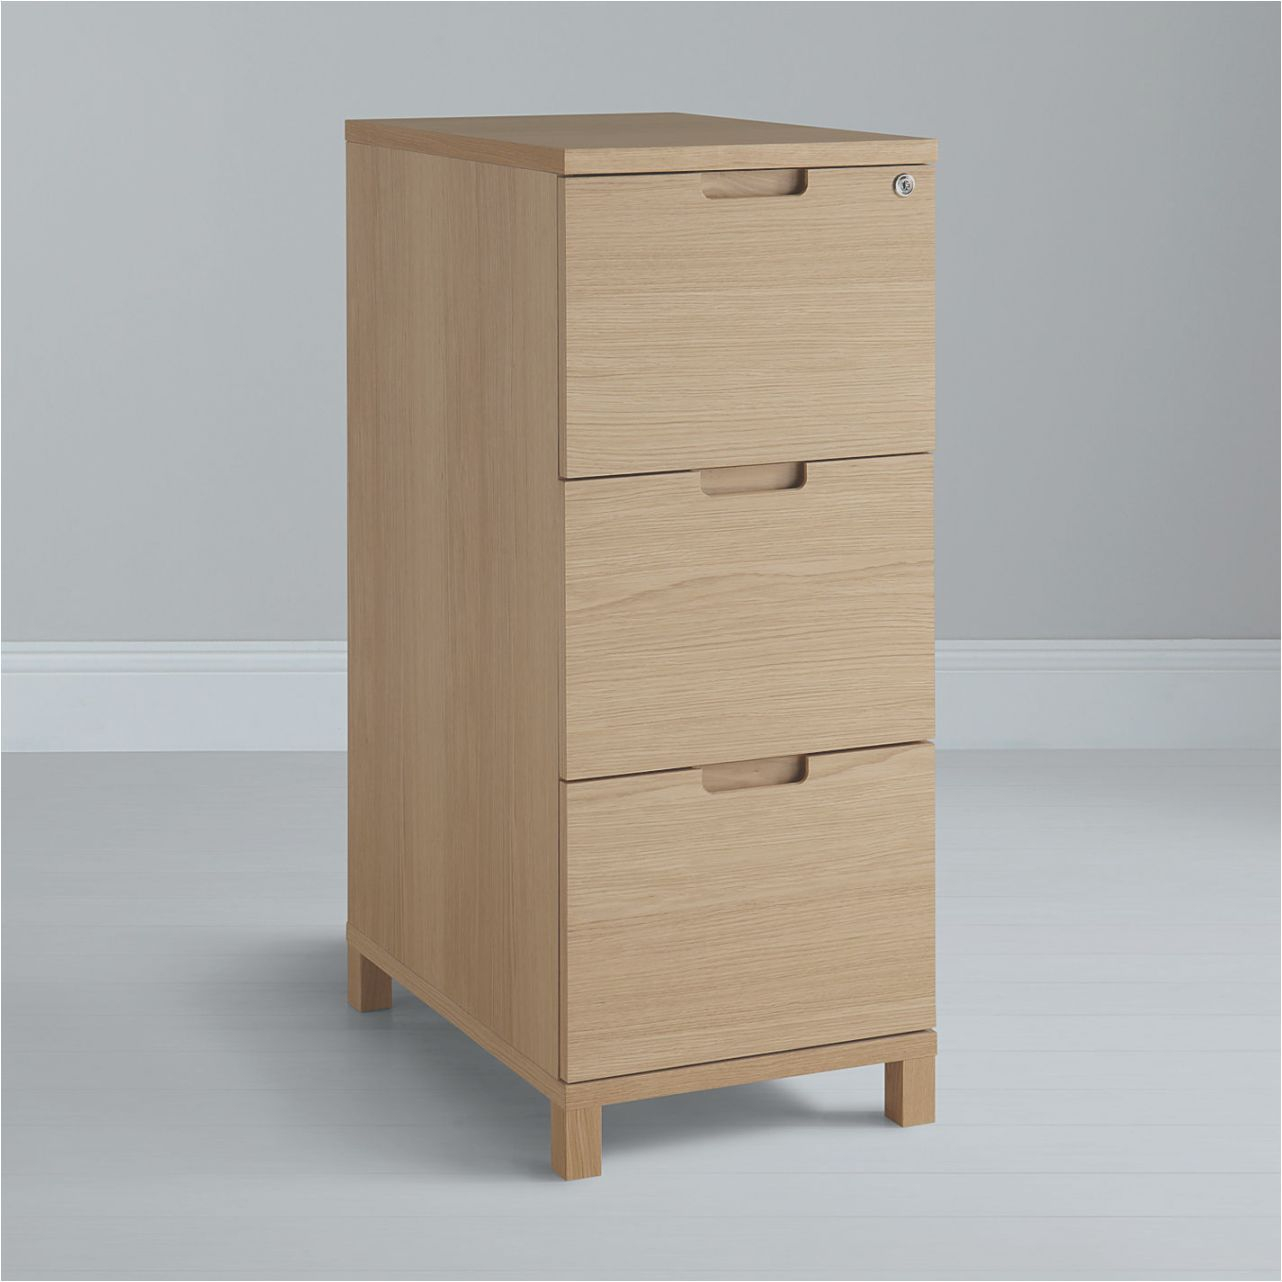 50 Unique Two Drawer Wood Filing Cabinets Atmosphere Two Drawer intended for size 1282 X 1282